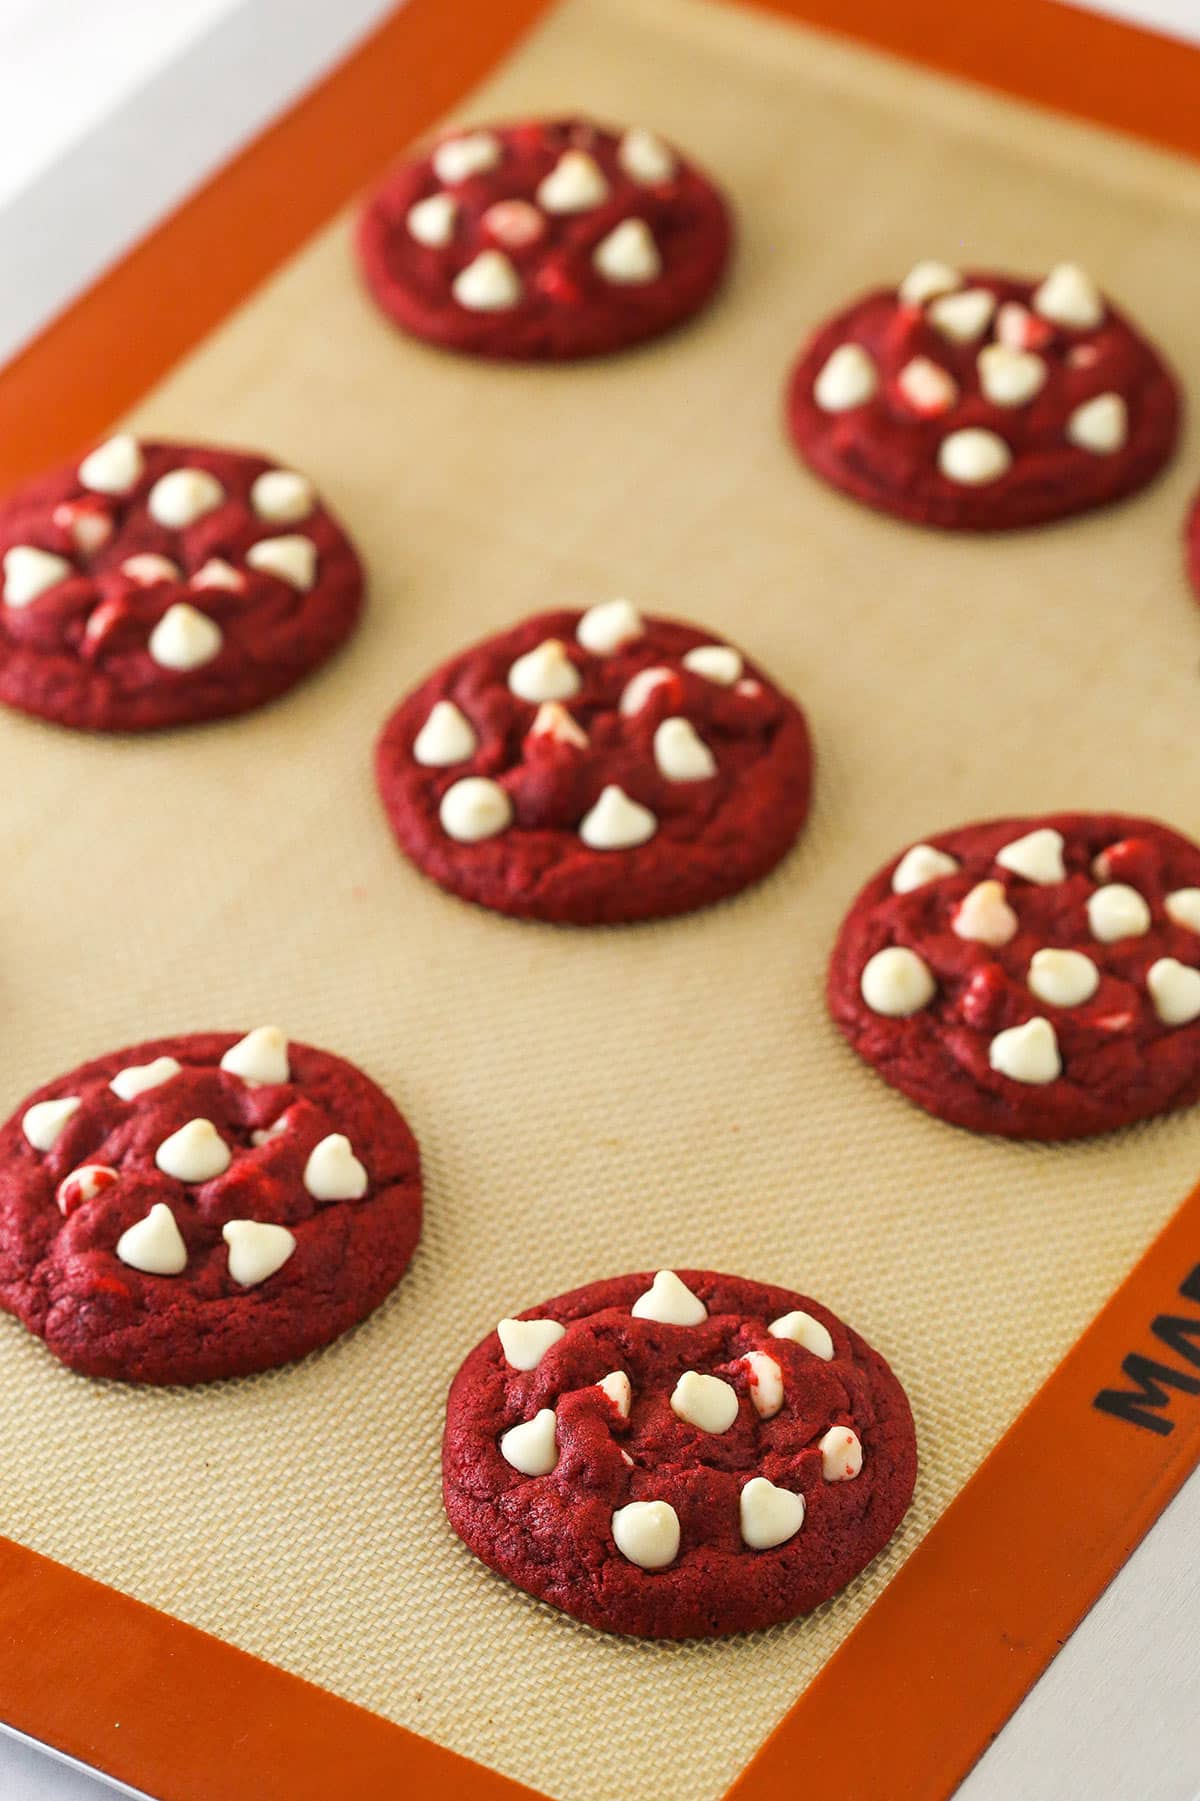 Baked red velvet cookies with white chocolate chips on a silicone baking mat.